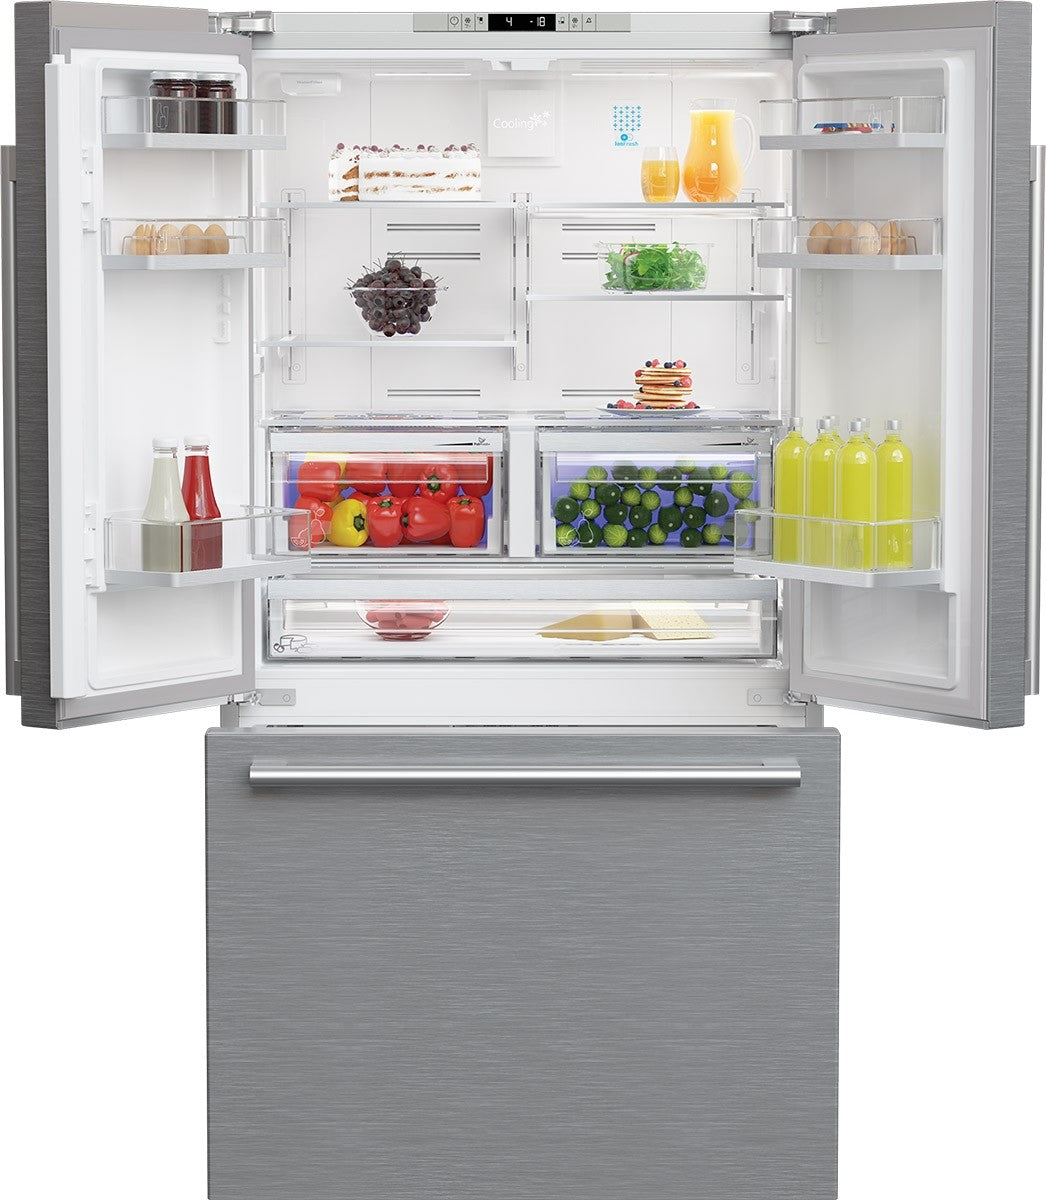 Blomberg Appliances BRFD2230XSS 36In French Door Refrigerator Counter Depth 22.3 Cu Ft, Stainless Doors, Stainless Handles